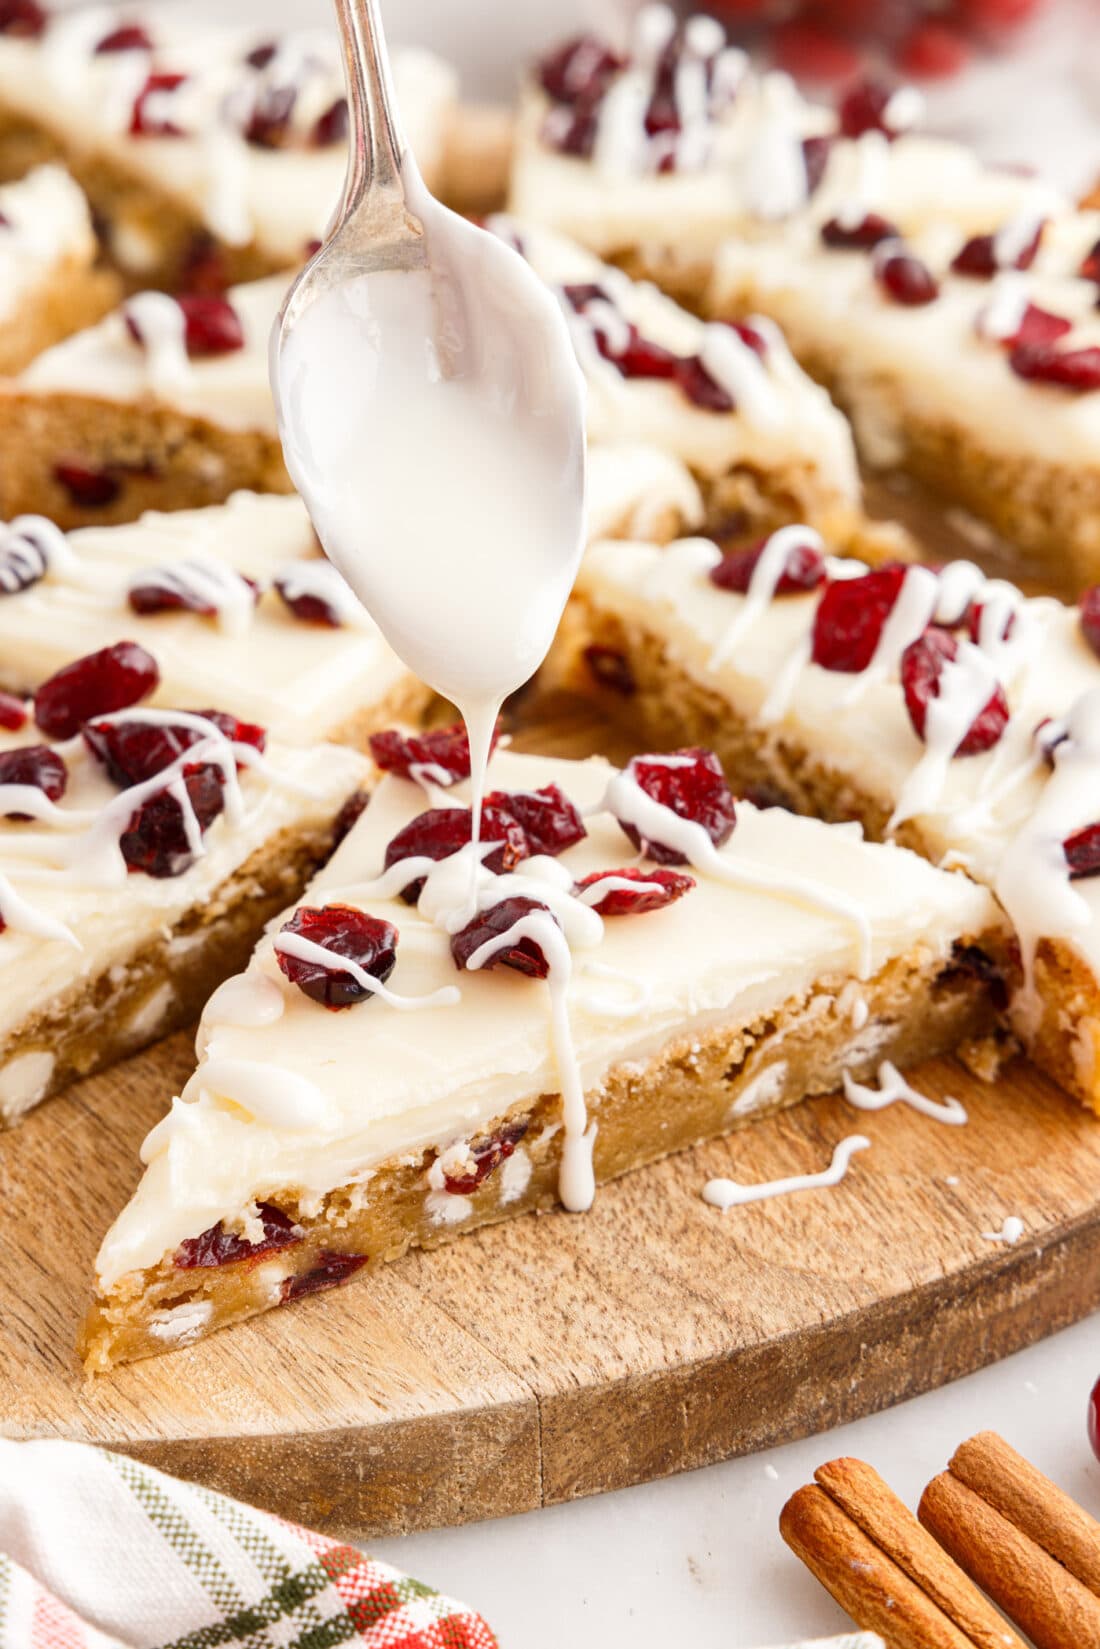 White chocolate bring drizzled over a Cranberry Bliss Bar